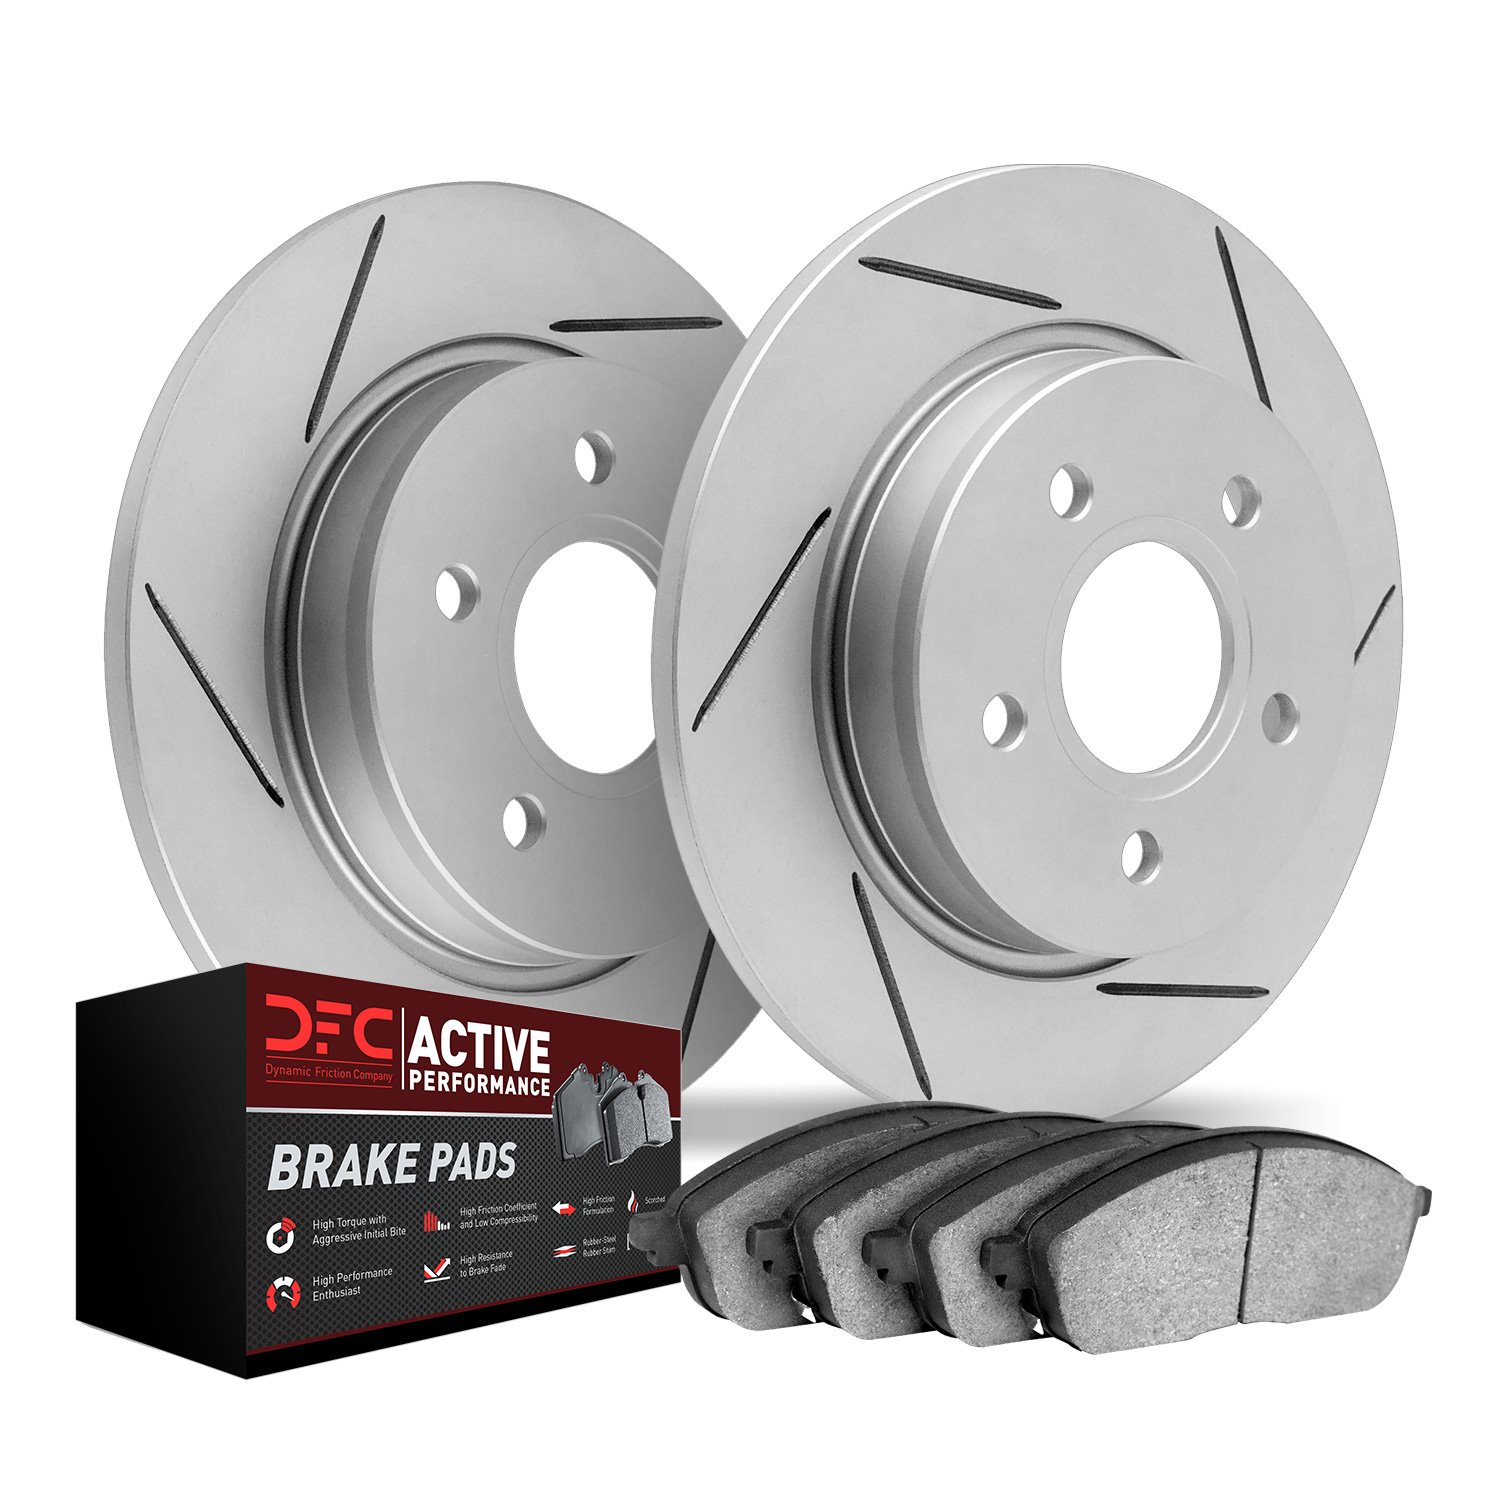 2702-74012 Geoperformance Slotted Brake Rotors with Active Performance Pads Kits, 1998-2005 Audi/Volkswagen, Position: Rear